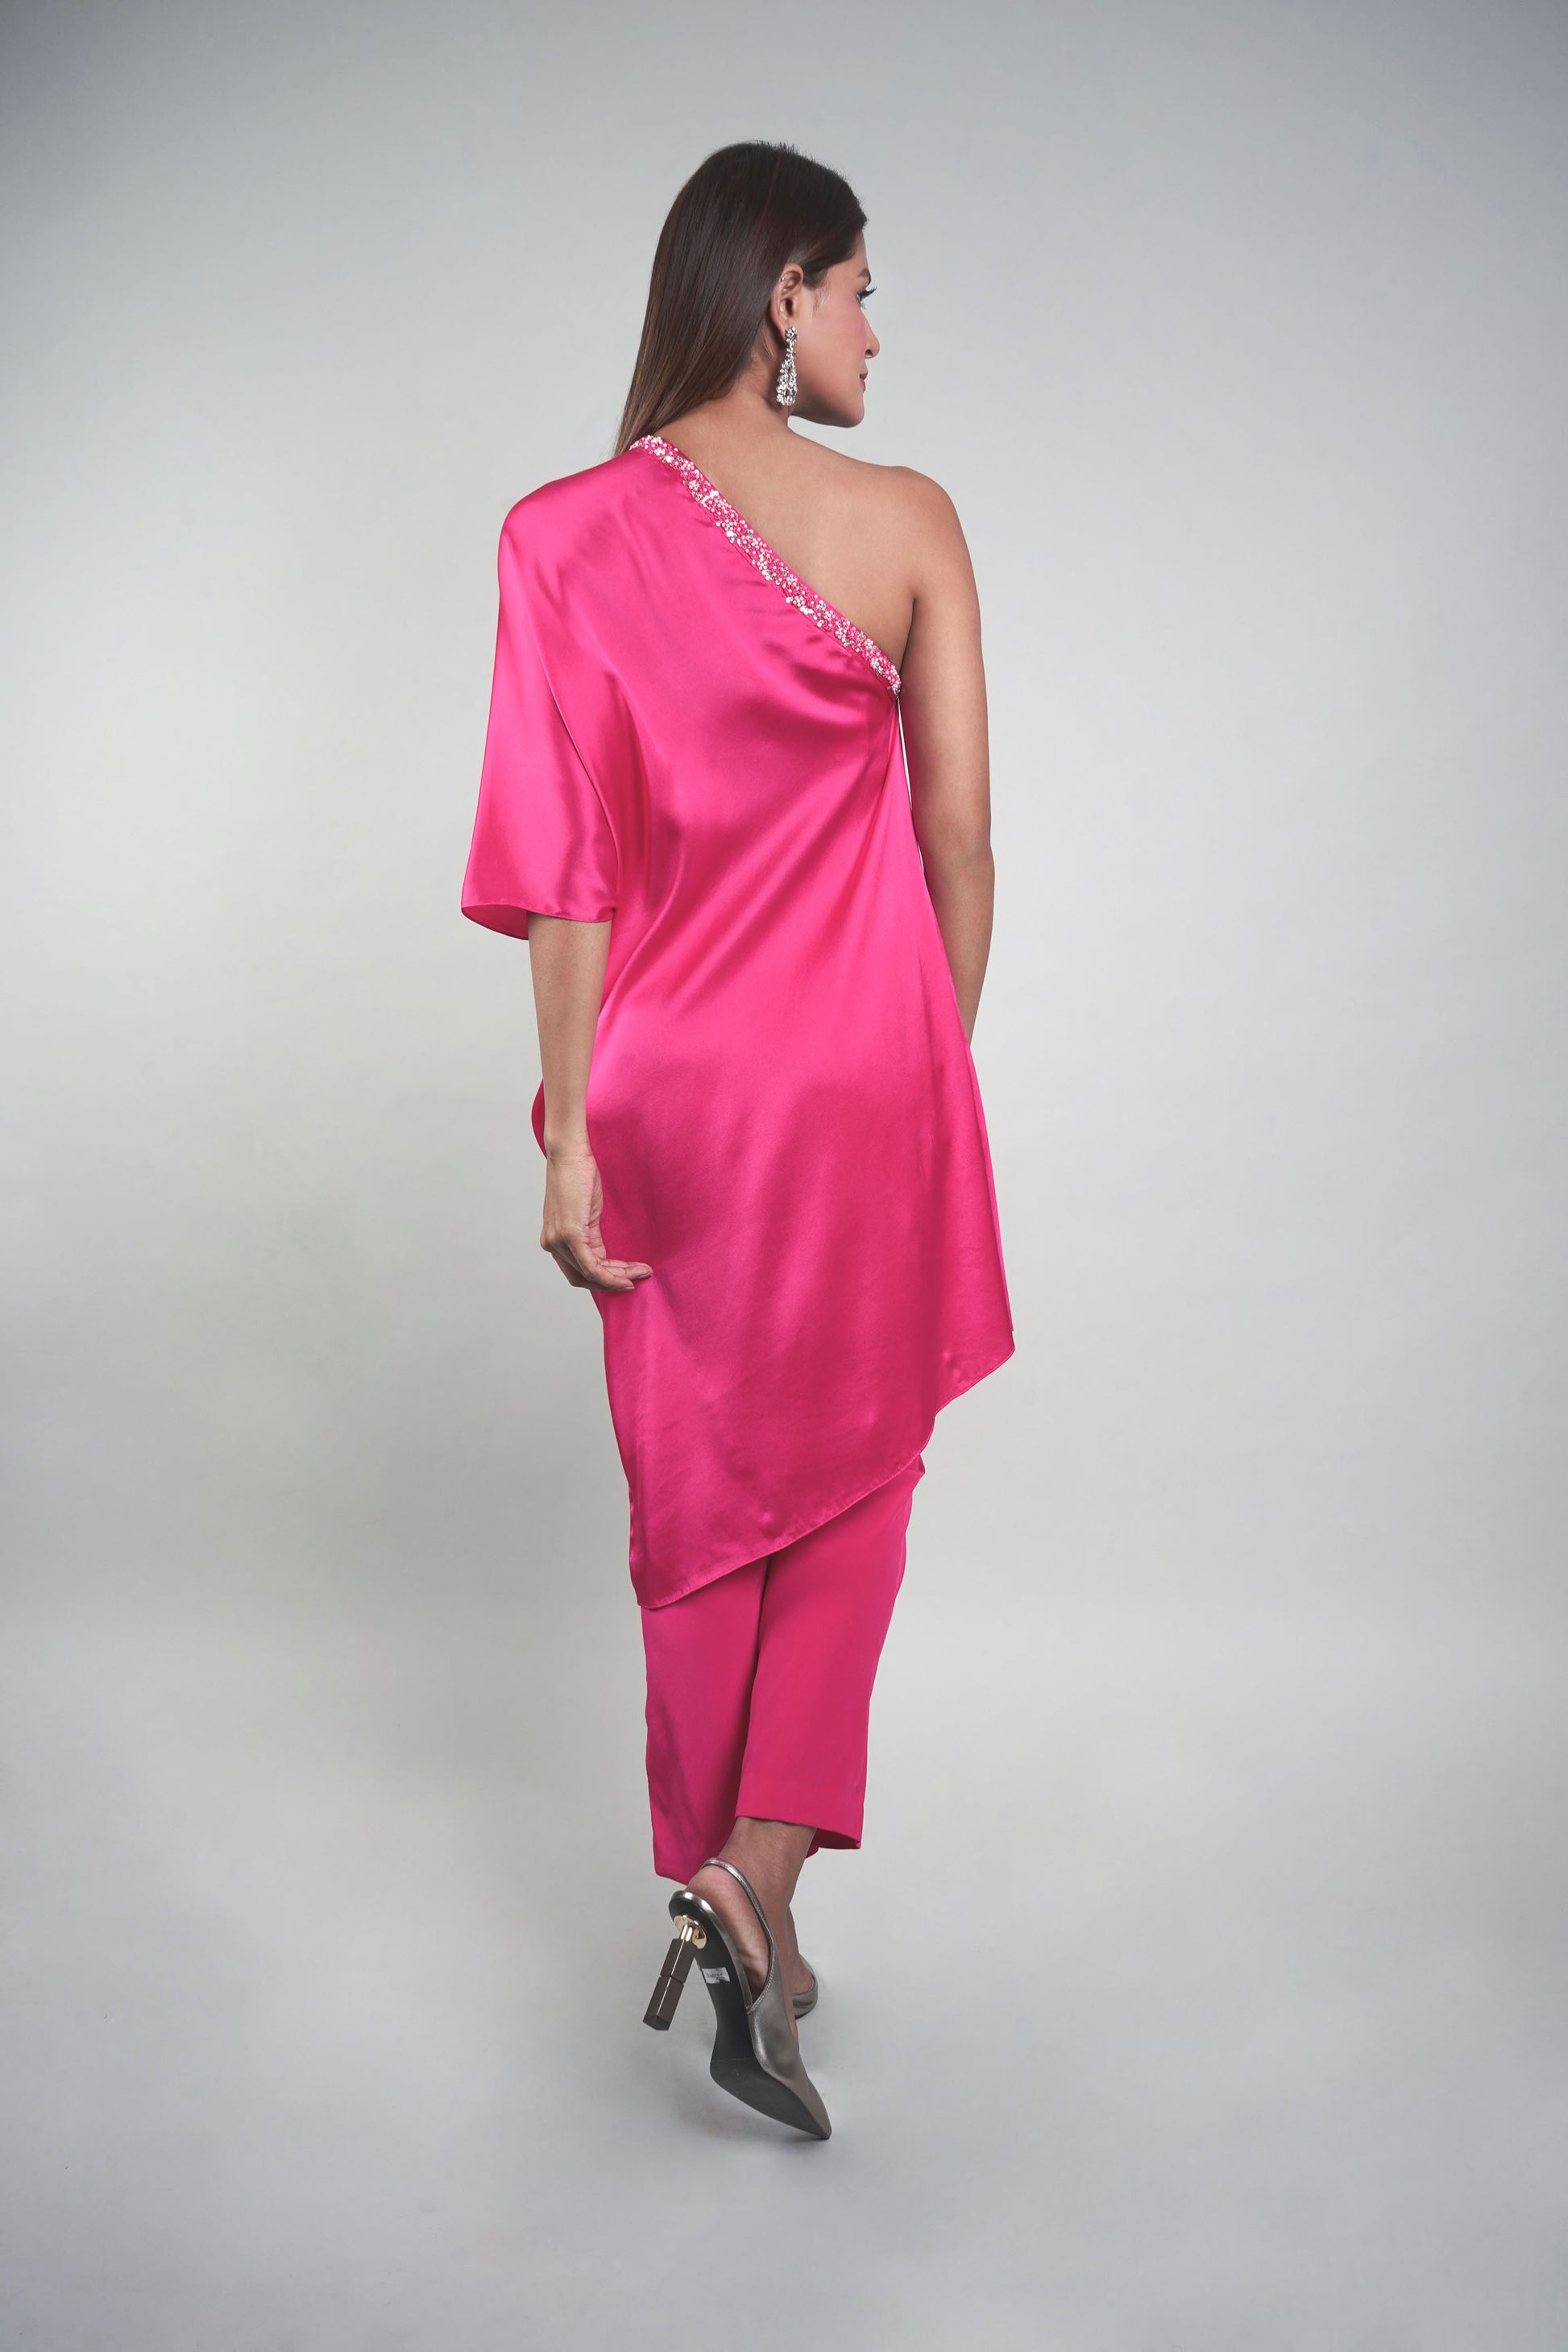 Stand out at your next party with our stunning Fuschia Co-ord Set! This fashionable ensemble is designed to elevate your look and make you the epitome of style.